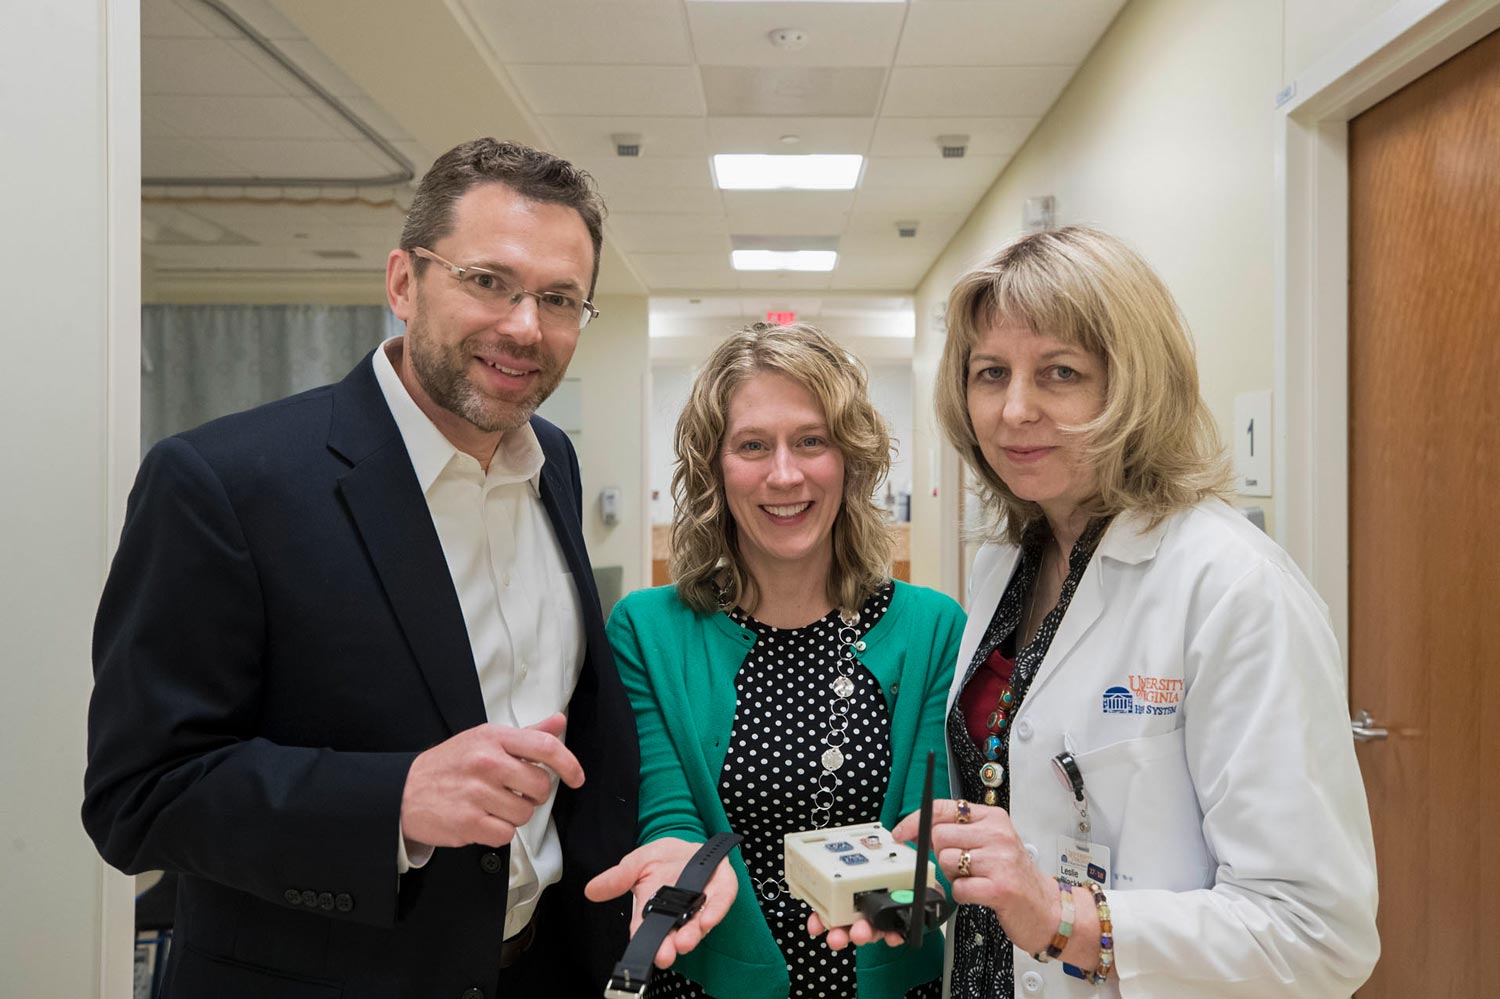 John Lach, Virginia LeBaron, and Leslie Blackhall stand in a hallway smiling for the camera while holding a pain management device